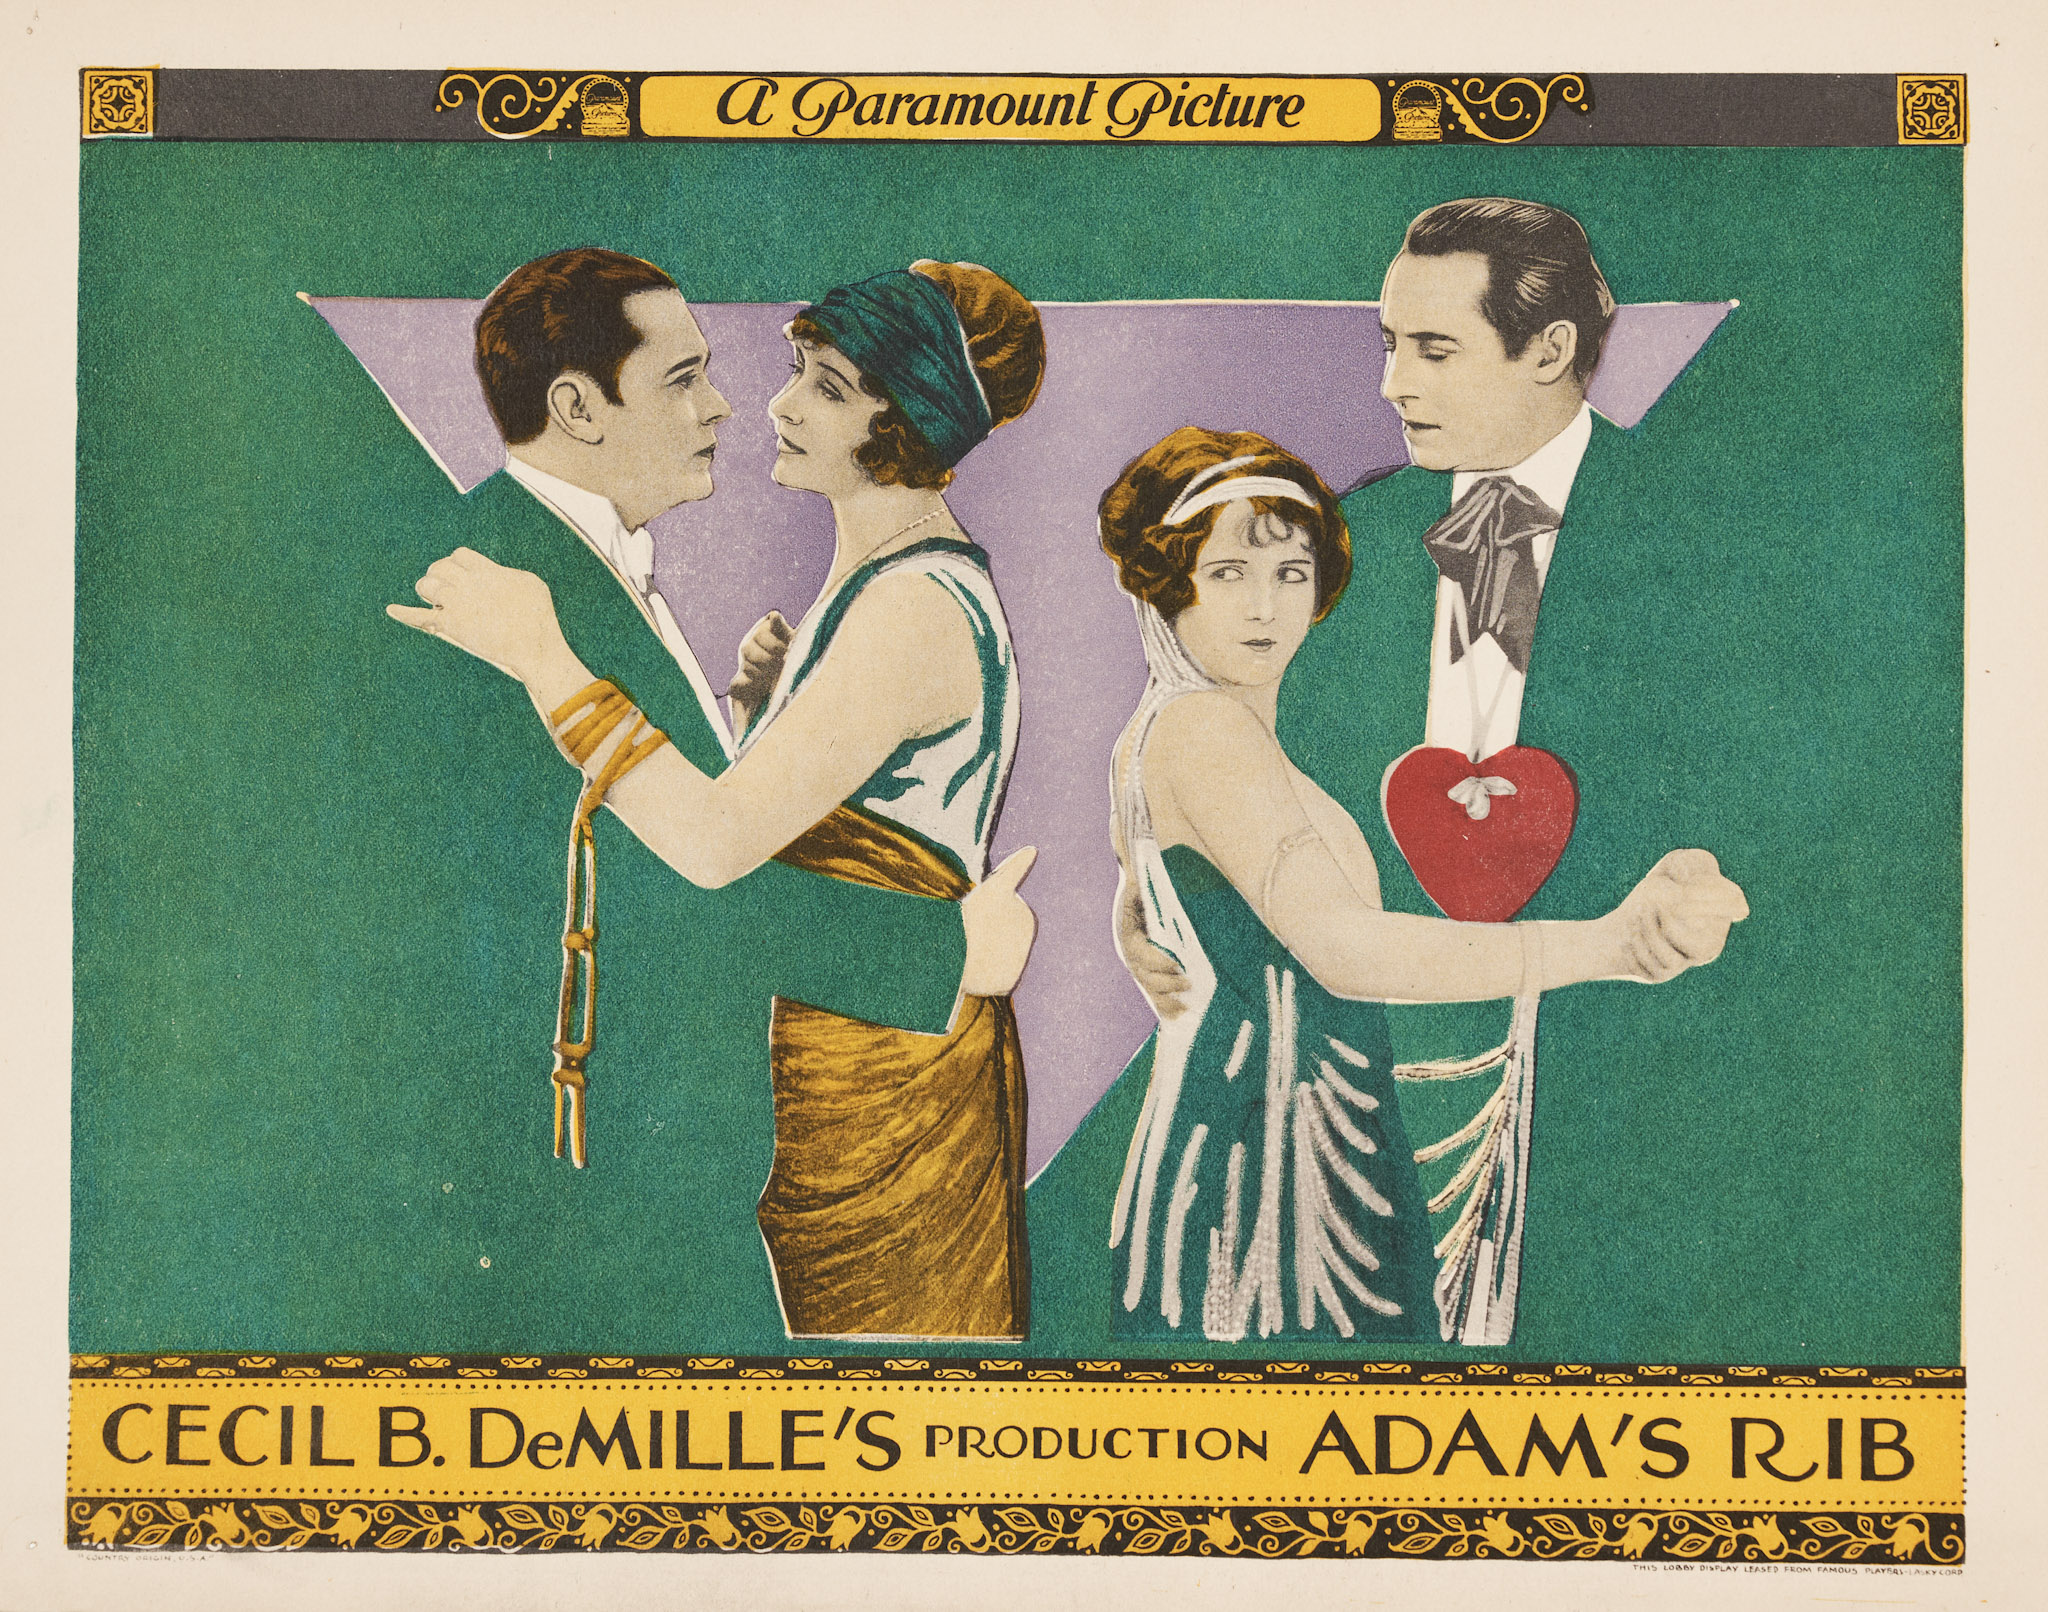  ‘Adam's Rib,’ 1923. Famous Players Lasky – Paramount. Story and screenplay by Jeanie MacPherson; film editing by Anne Bauchens; costume design by Clare West. Photo credit: Dwight M. Cleveland Collection